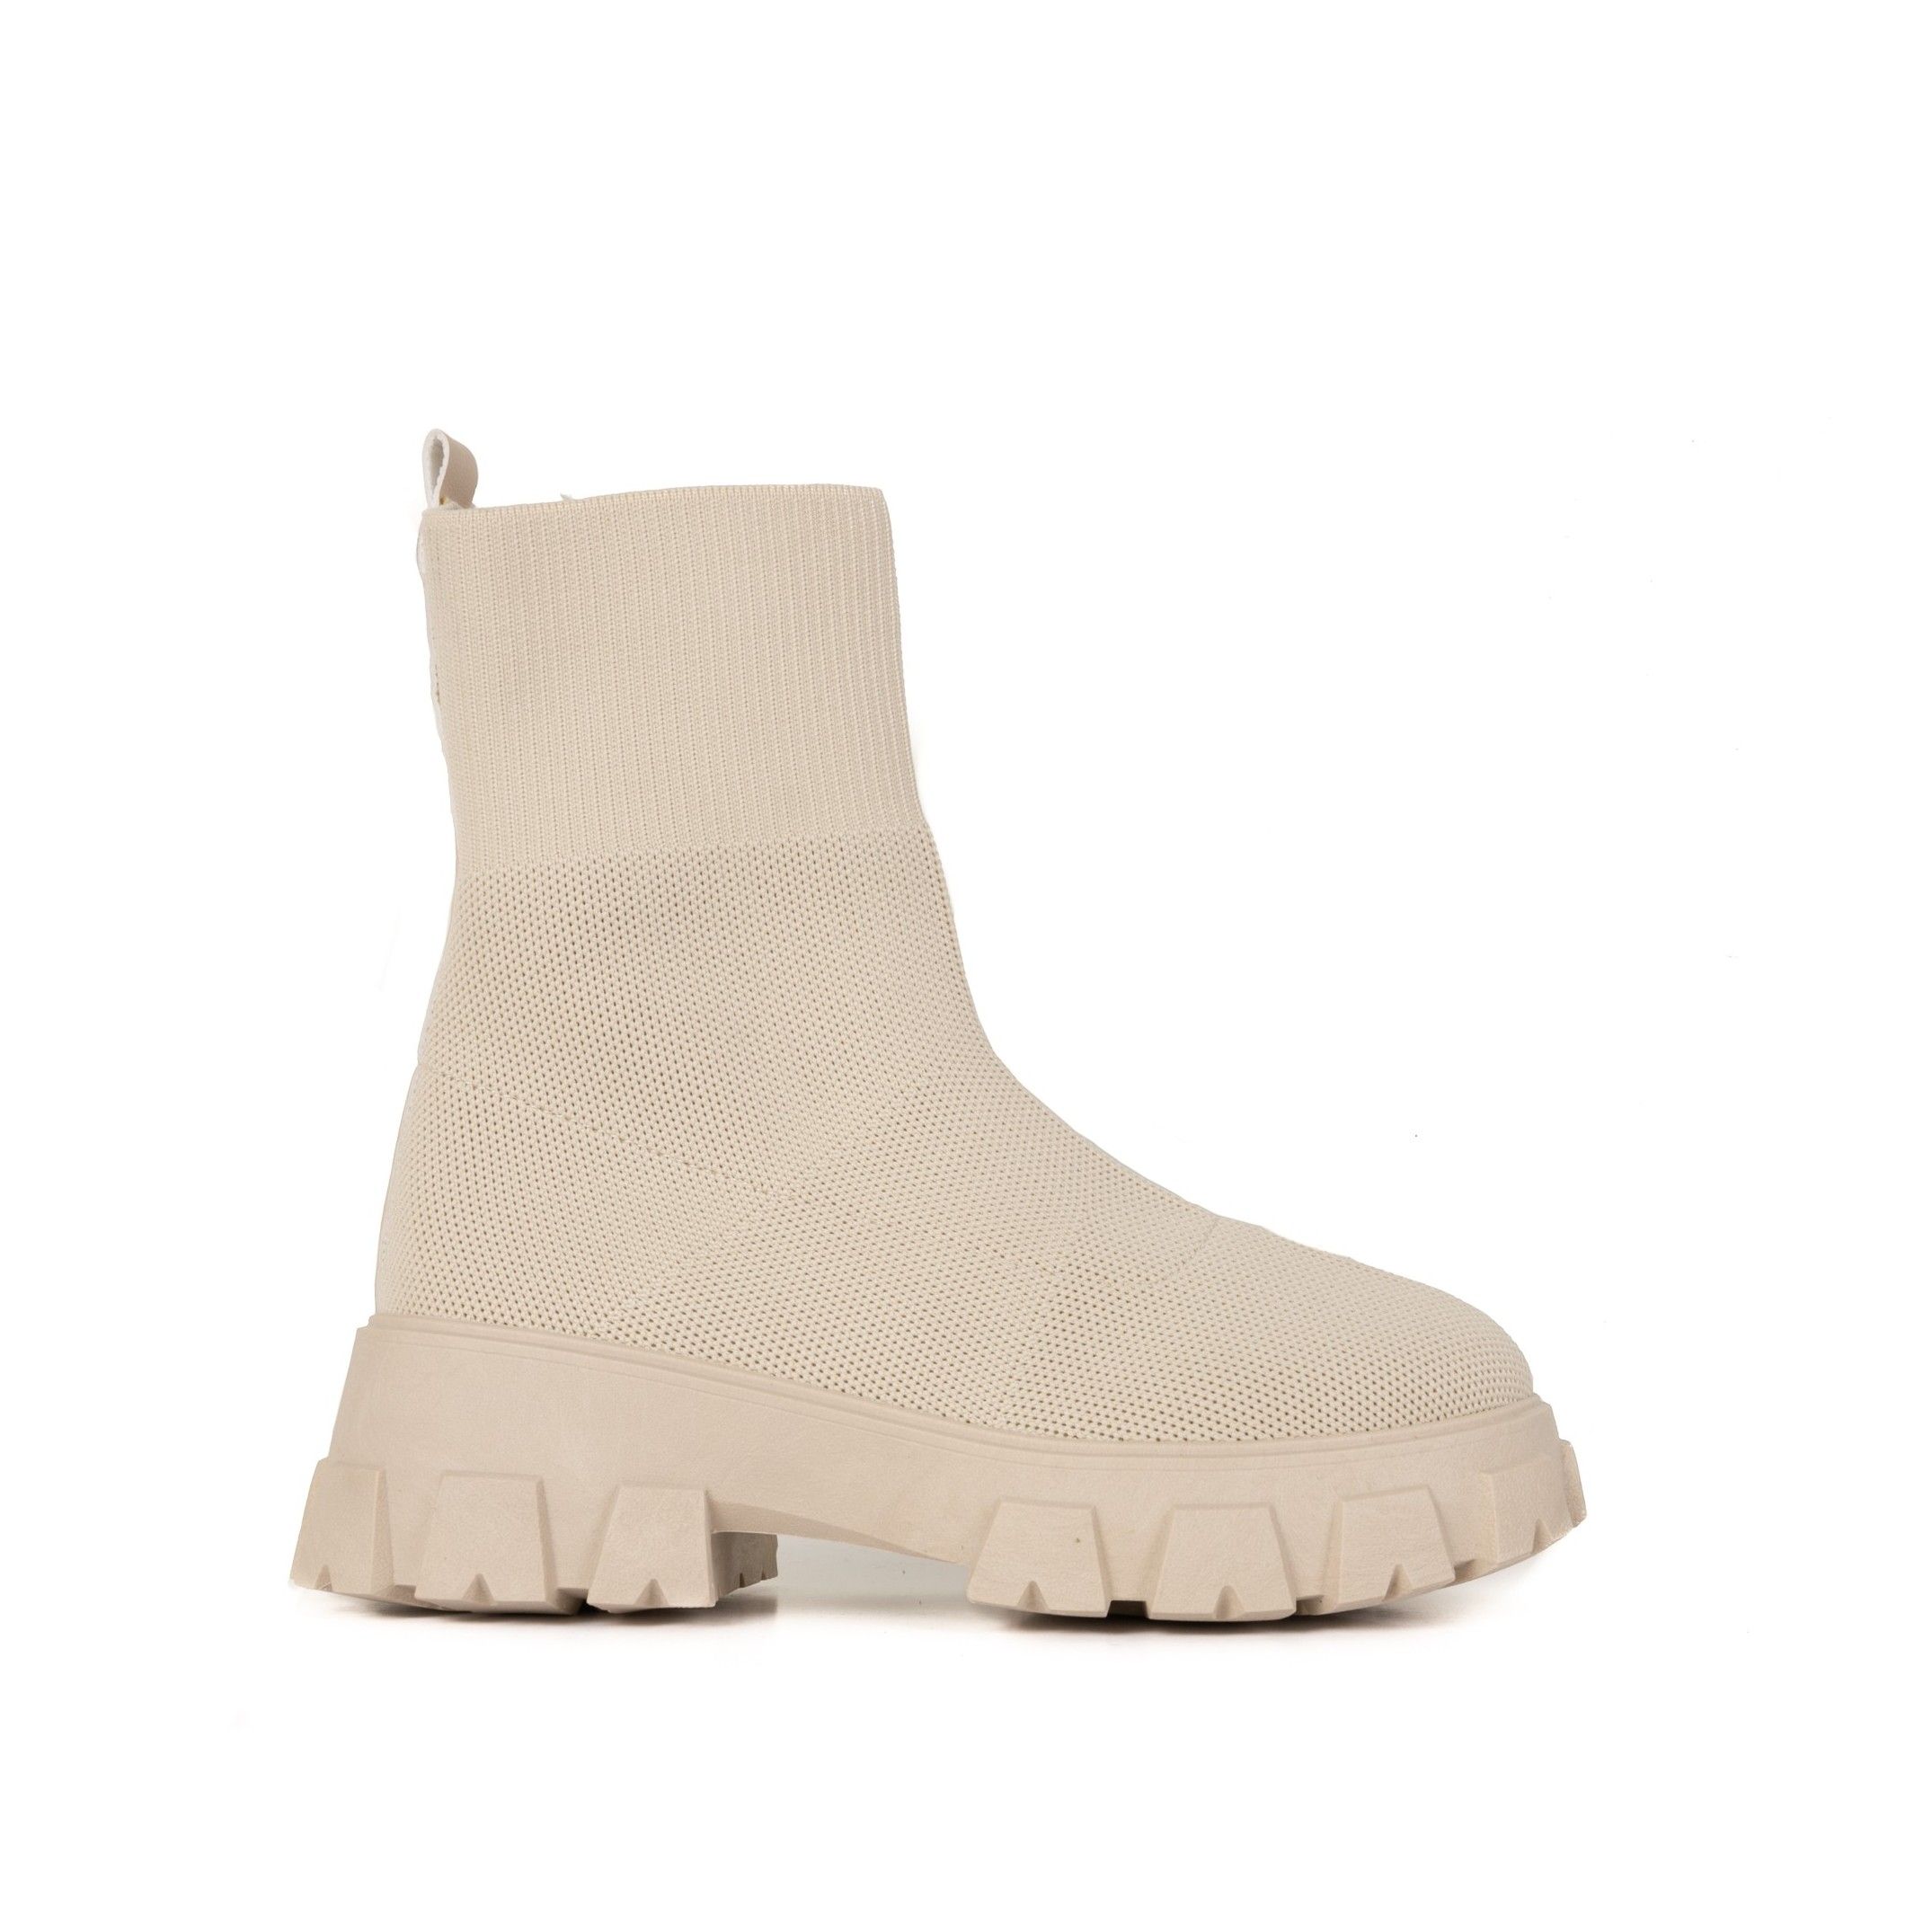 Sock ankle boot by María Barceló. Closure: elastic. Upper: textile. Inner: textile. Insole: textile. Sole: non-slip. Heel: 3 cm.